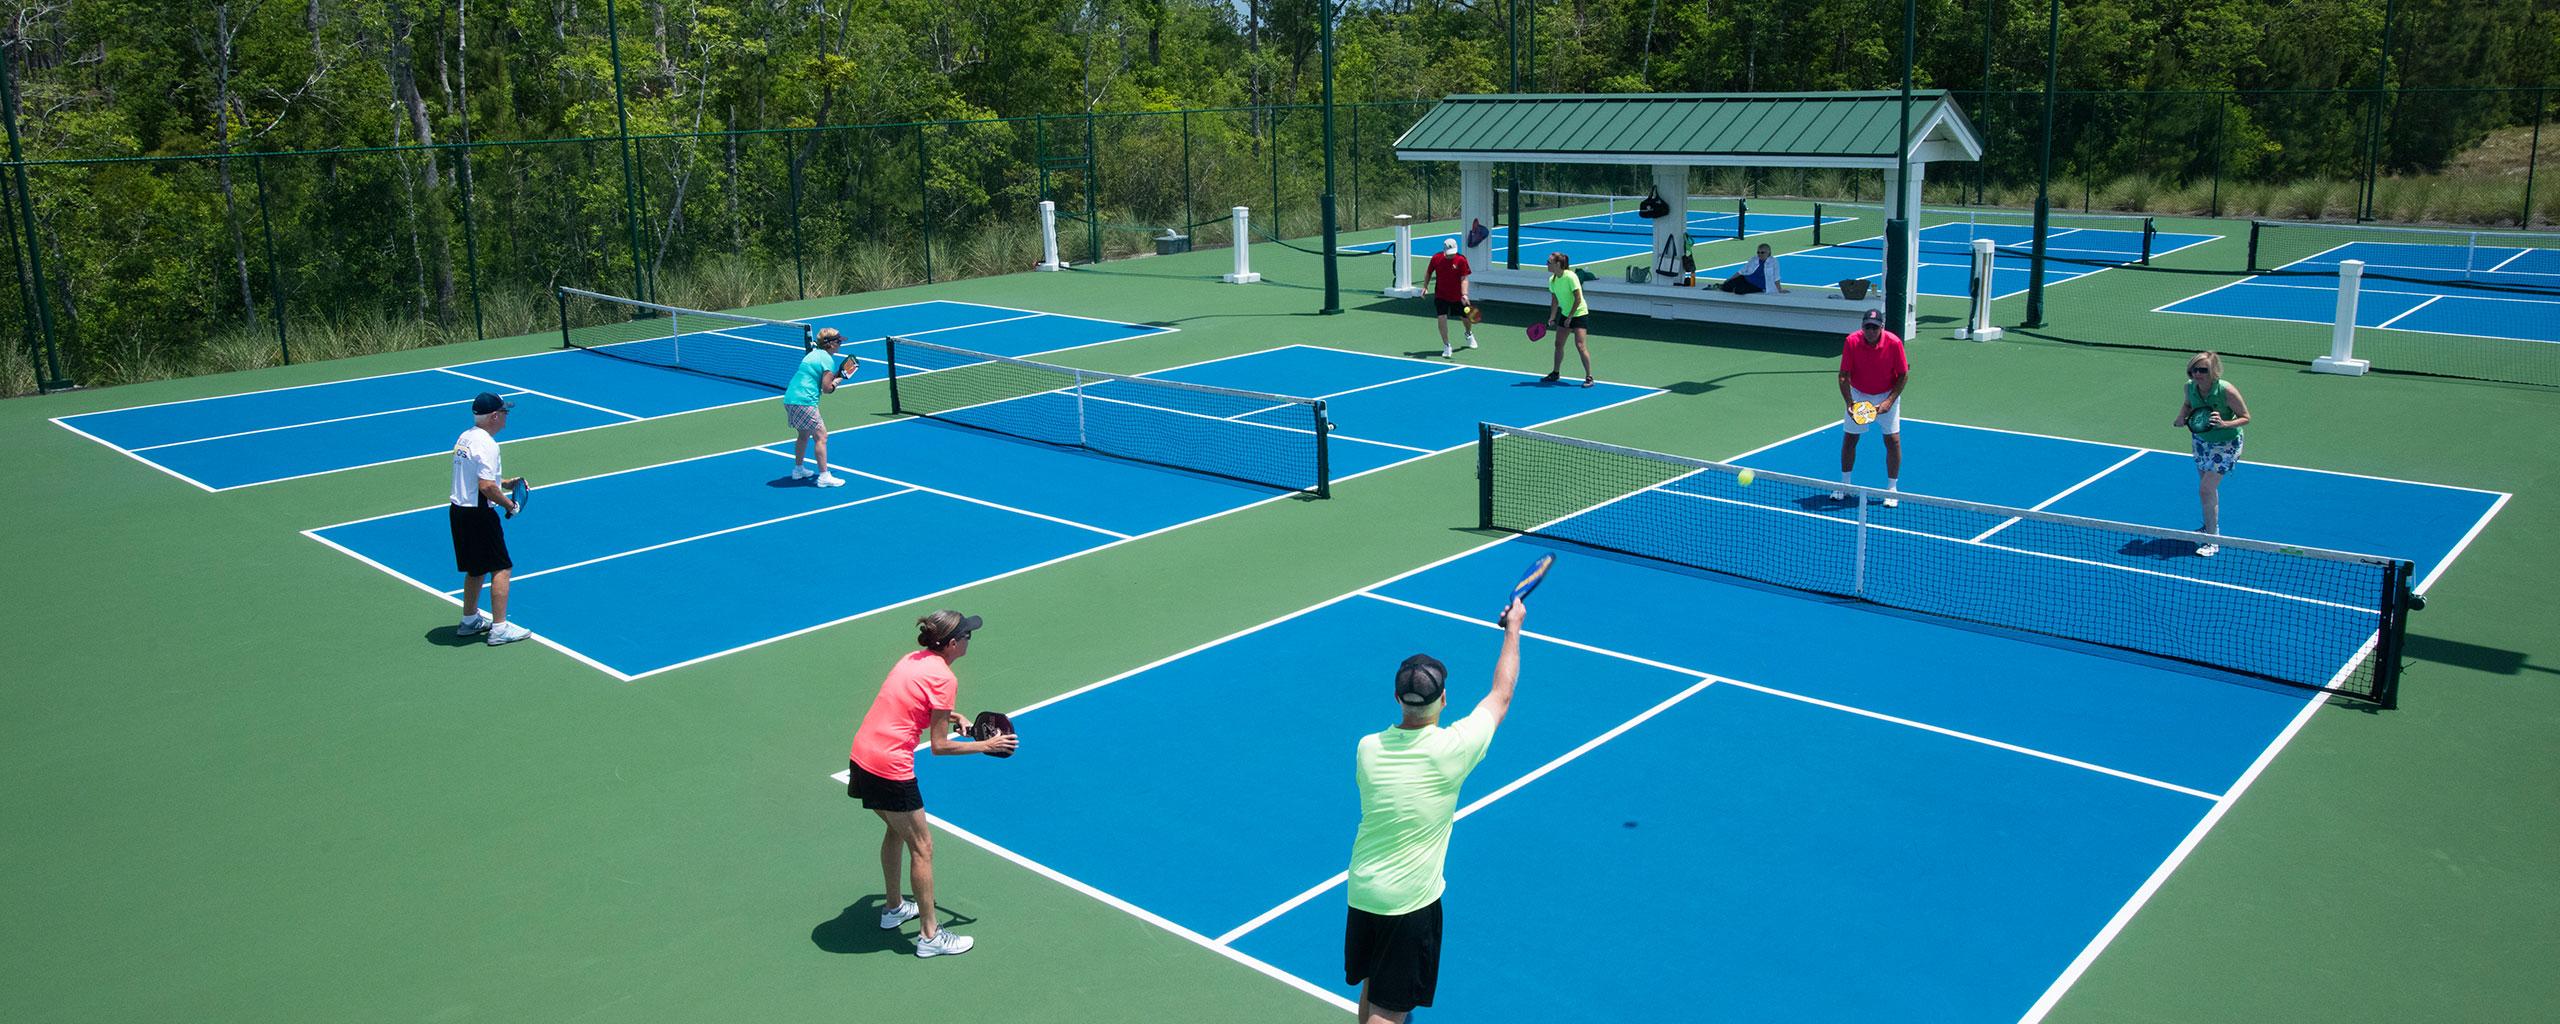 how to score in pickleball